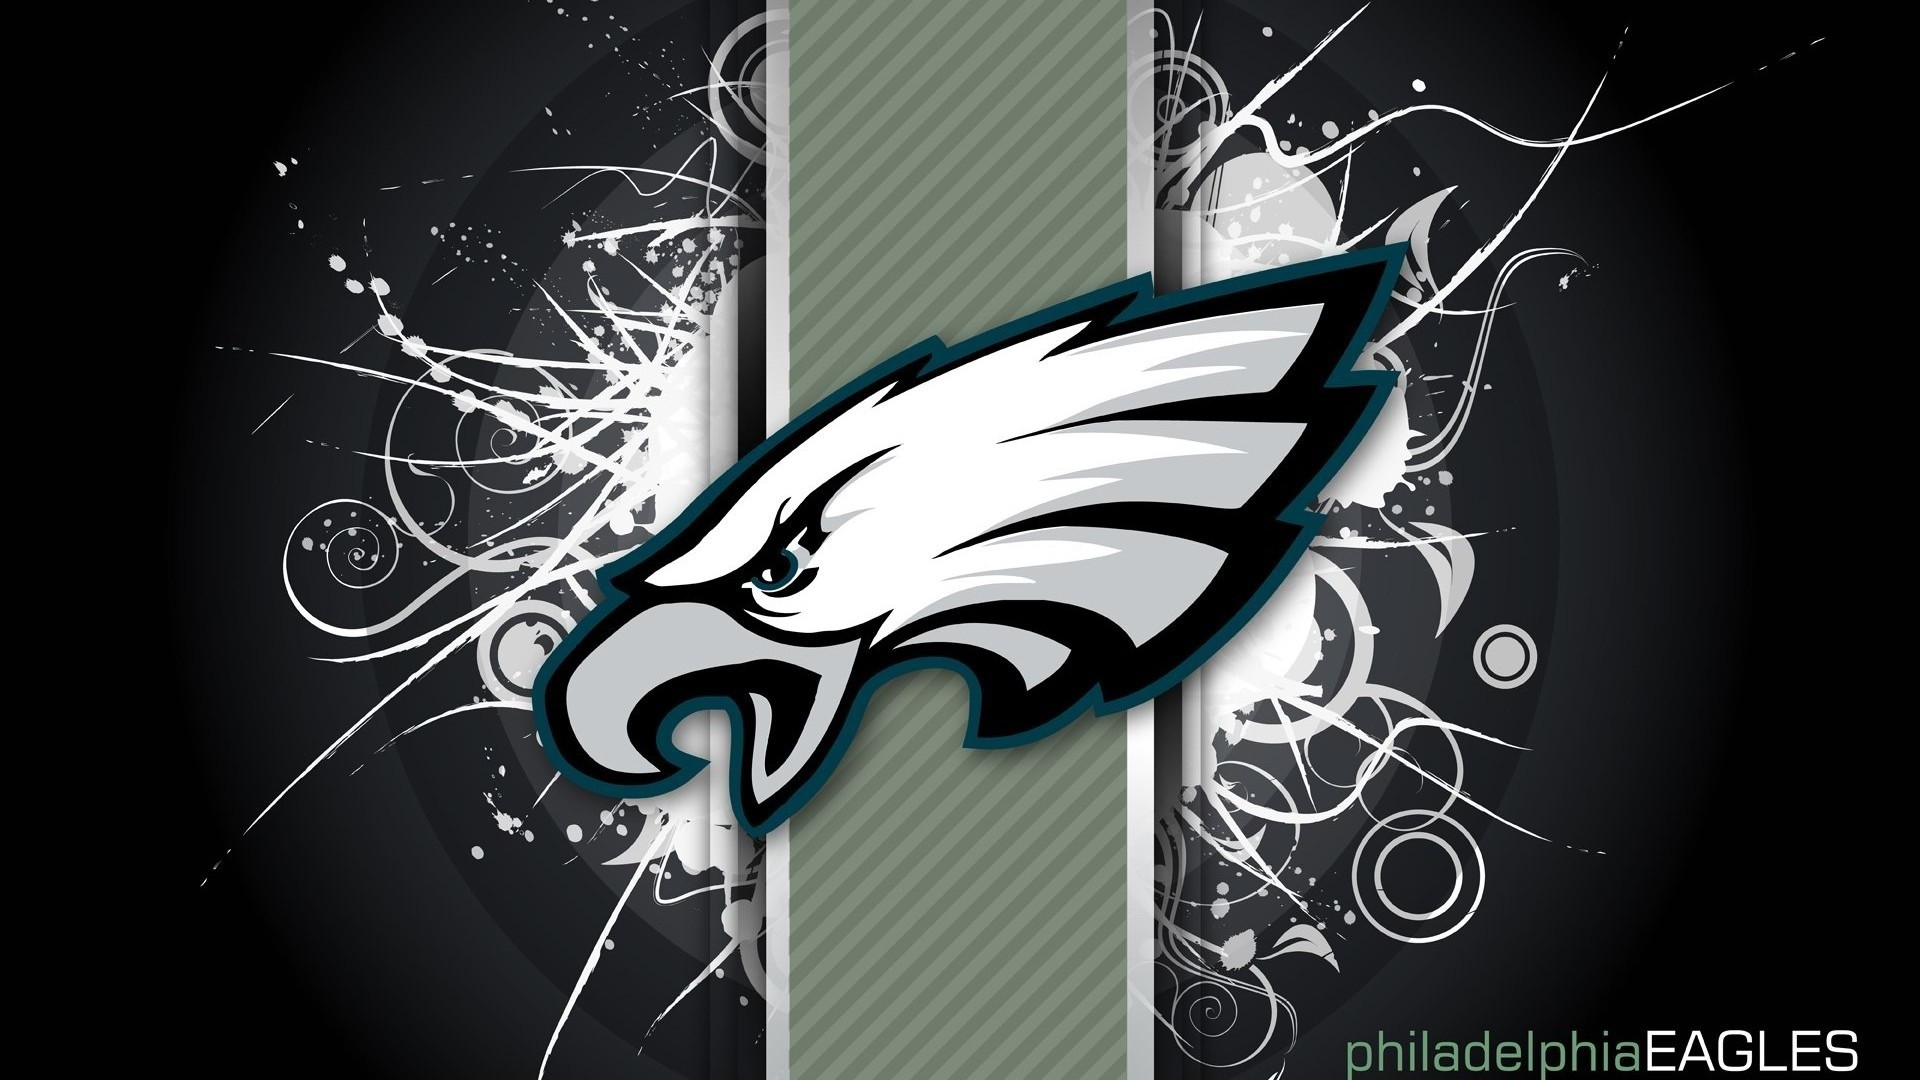 Wallpapers Eagles Football With Resolution 1920X1080 pixel. You can make this wallpaper for your Mac or Windows Desktop Background, iPhone, Android or Tablet and another Smartphone device for free